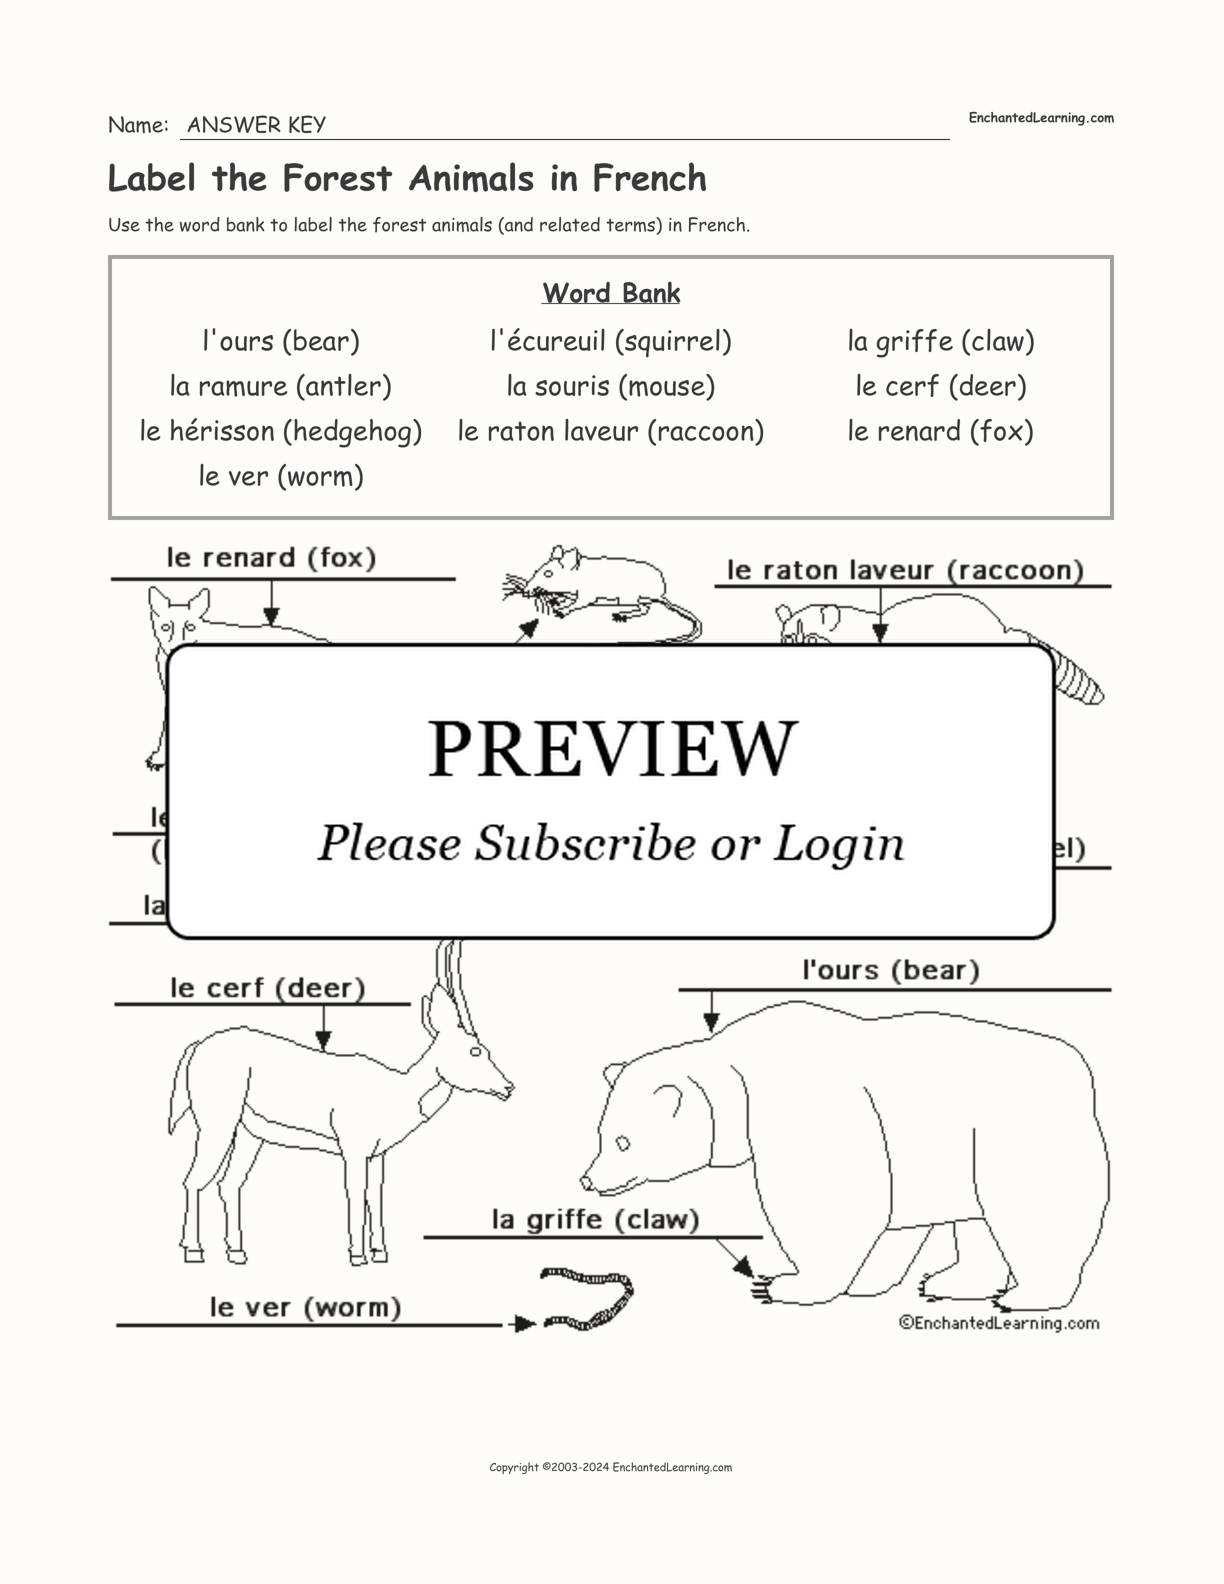 Label the Forest Animals in French interactive worksheet page 2